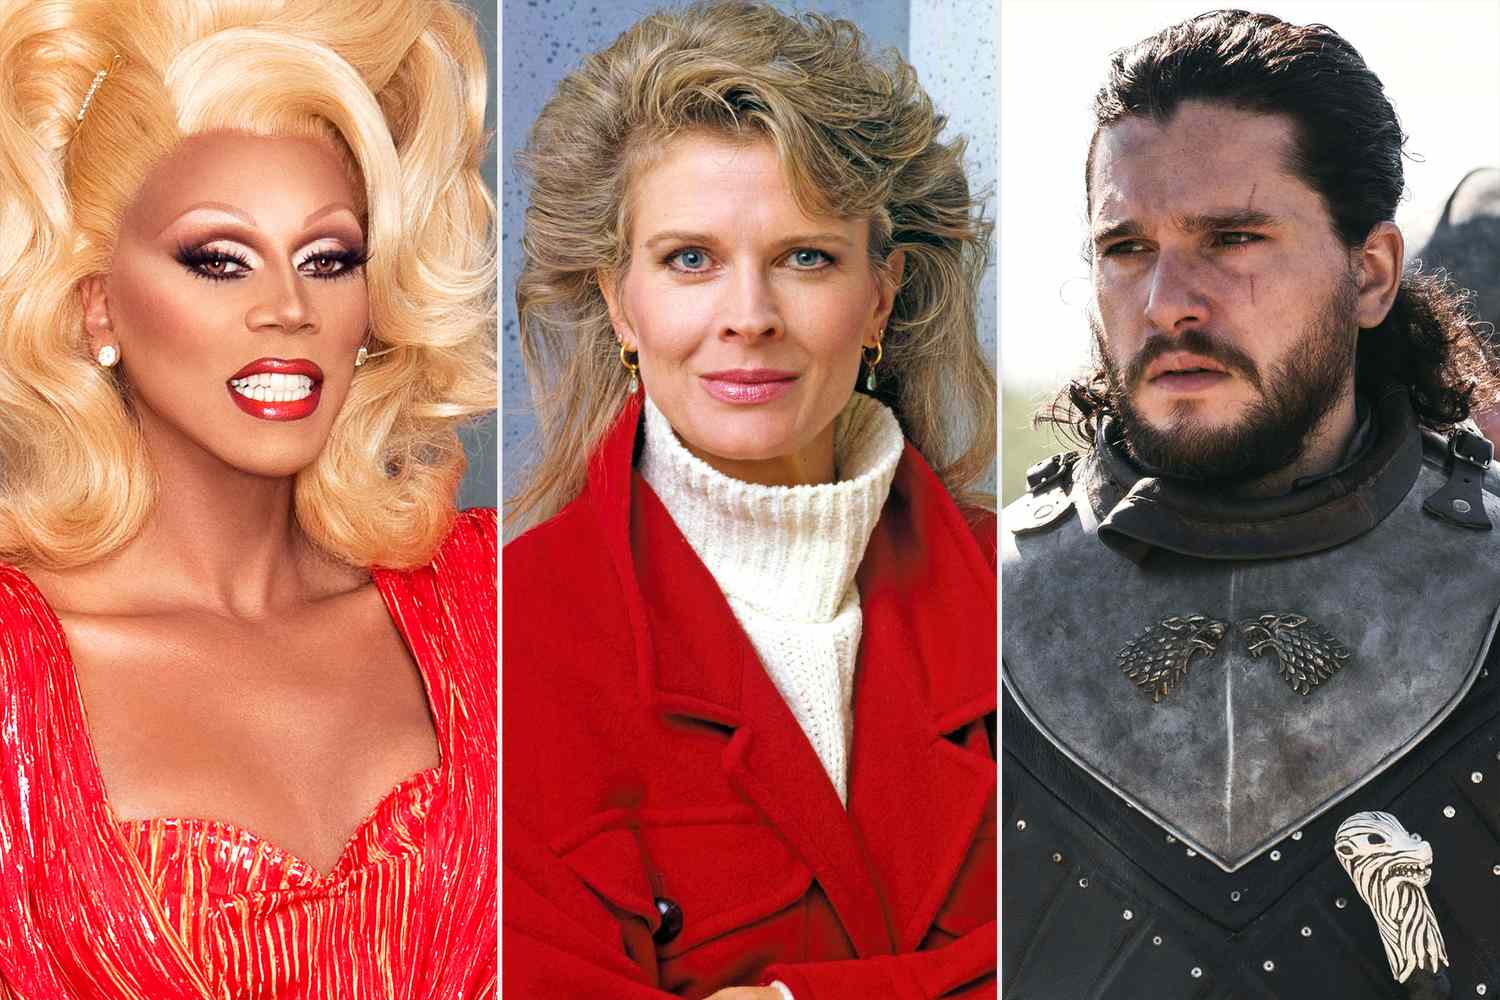 RuPaul publicity photo Logo Network RuPaul's Drag Race; LOS ANGELES - JANUARY 1: Murphy Brown, a CBS television situation comedy program featuring topical current events and satire. Pictured is Candice Bergen (as Murphy Brown, seasoned broadcast journalist). January 1, 1993. (Photo by CBS via Getty Images); Game of Thrones "The Bells" Liam Cunningham as Davos Seaworth and Kit Harington as Jon Snow